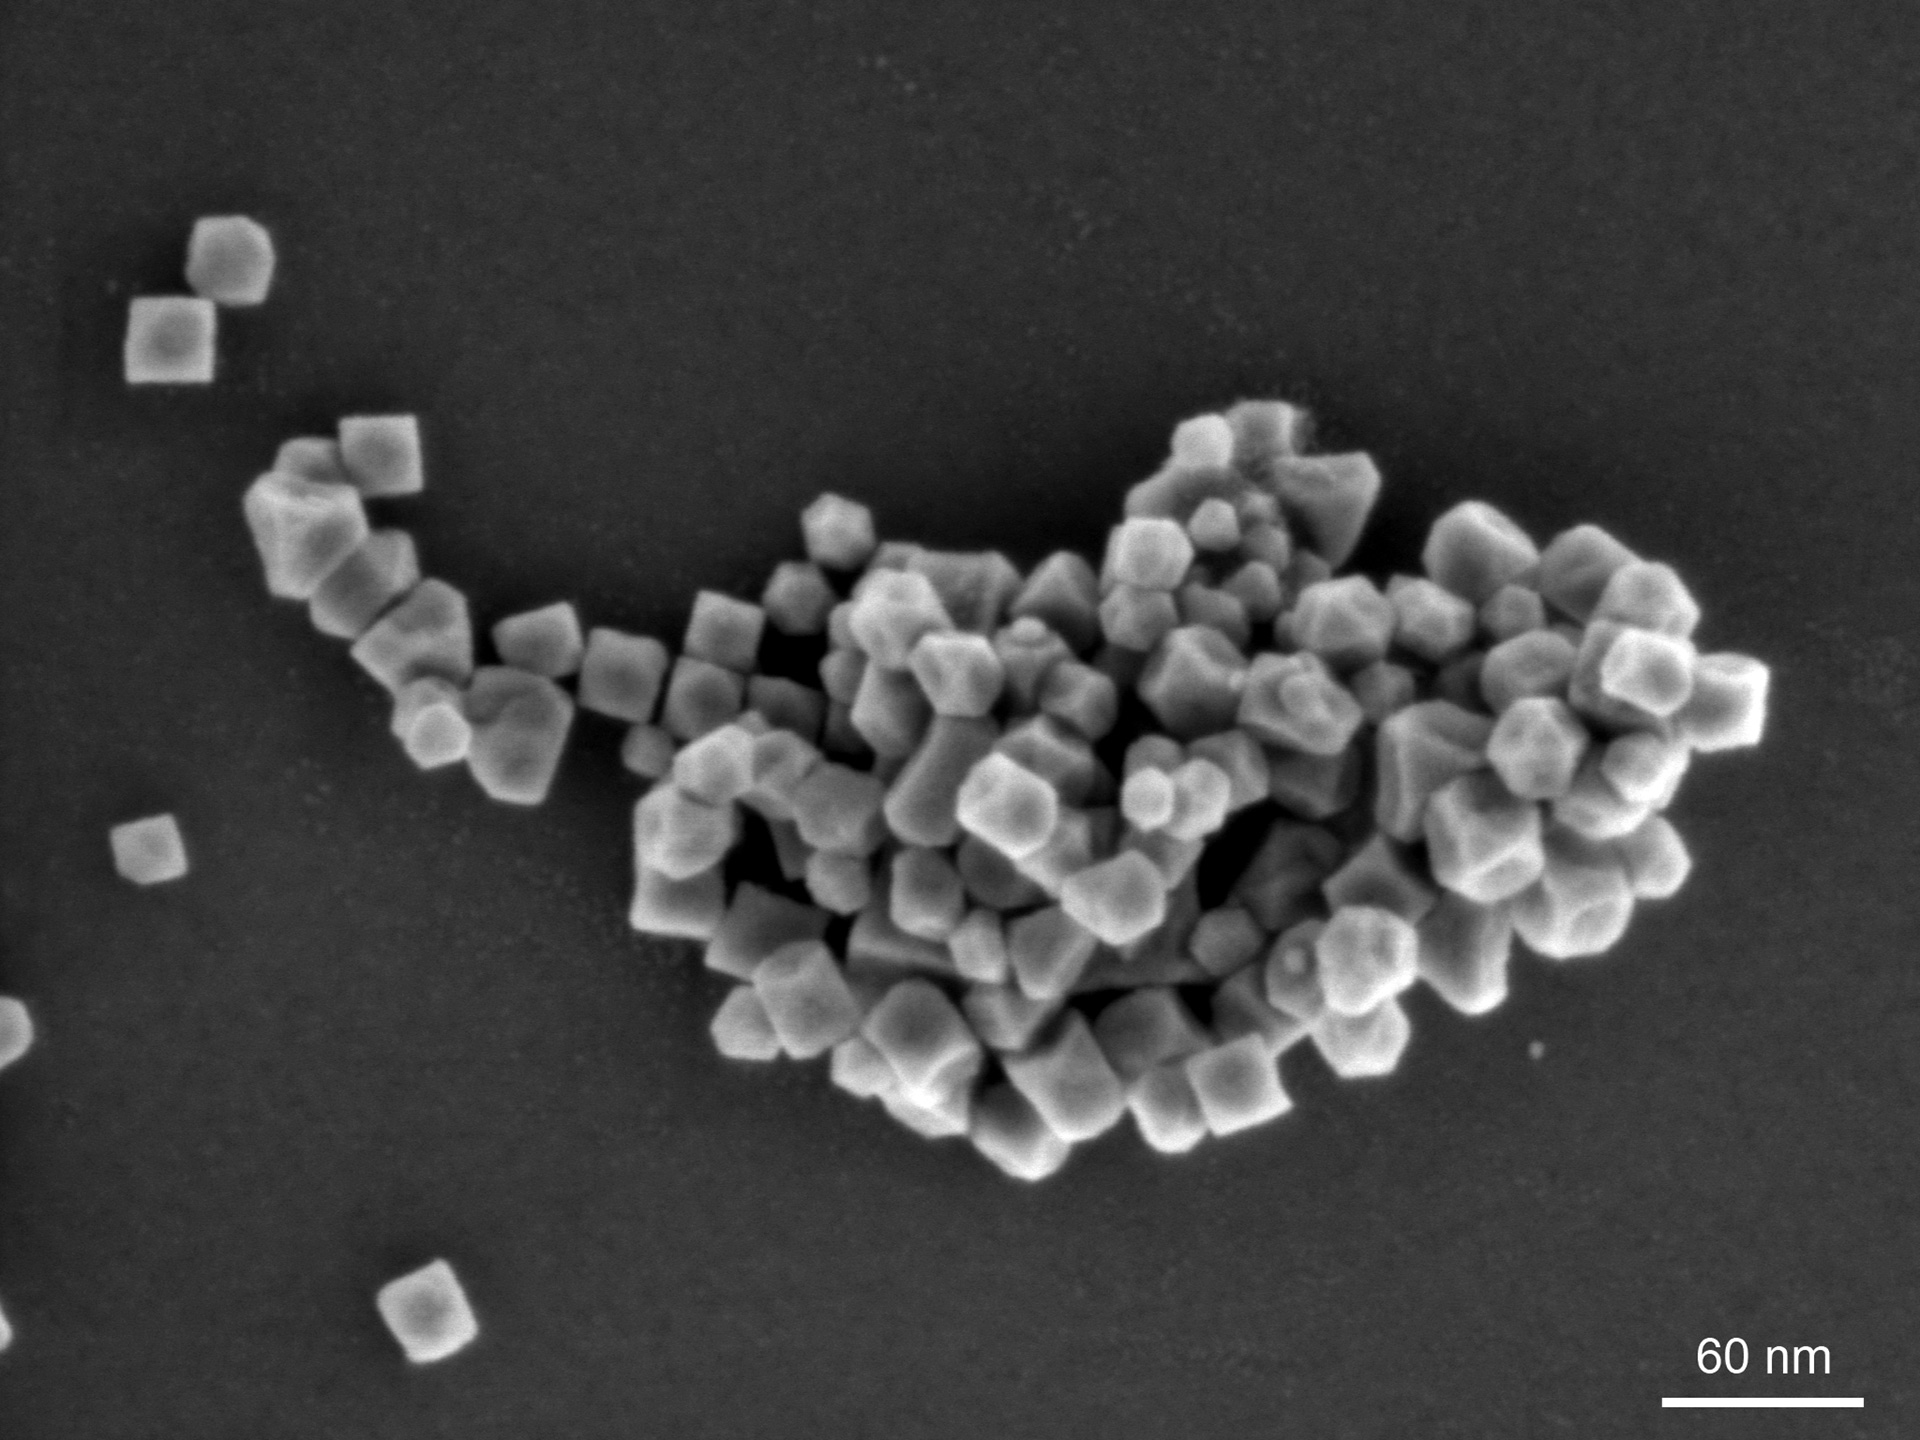 Magnetic FeMn nanoparticles. Edge length of a cube ca. 25 nm. GeminiSEM 560, 1 kV, Inlens SE, field of view 565 nm.